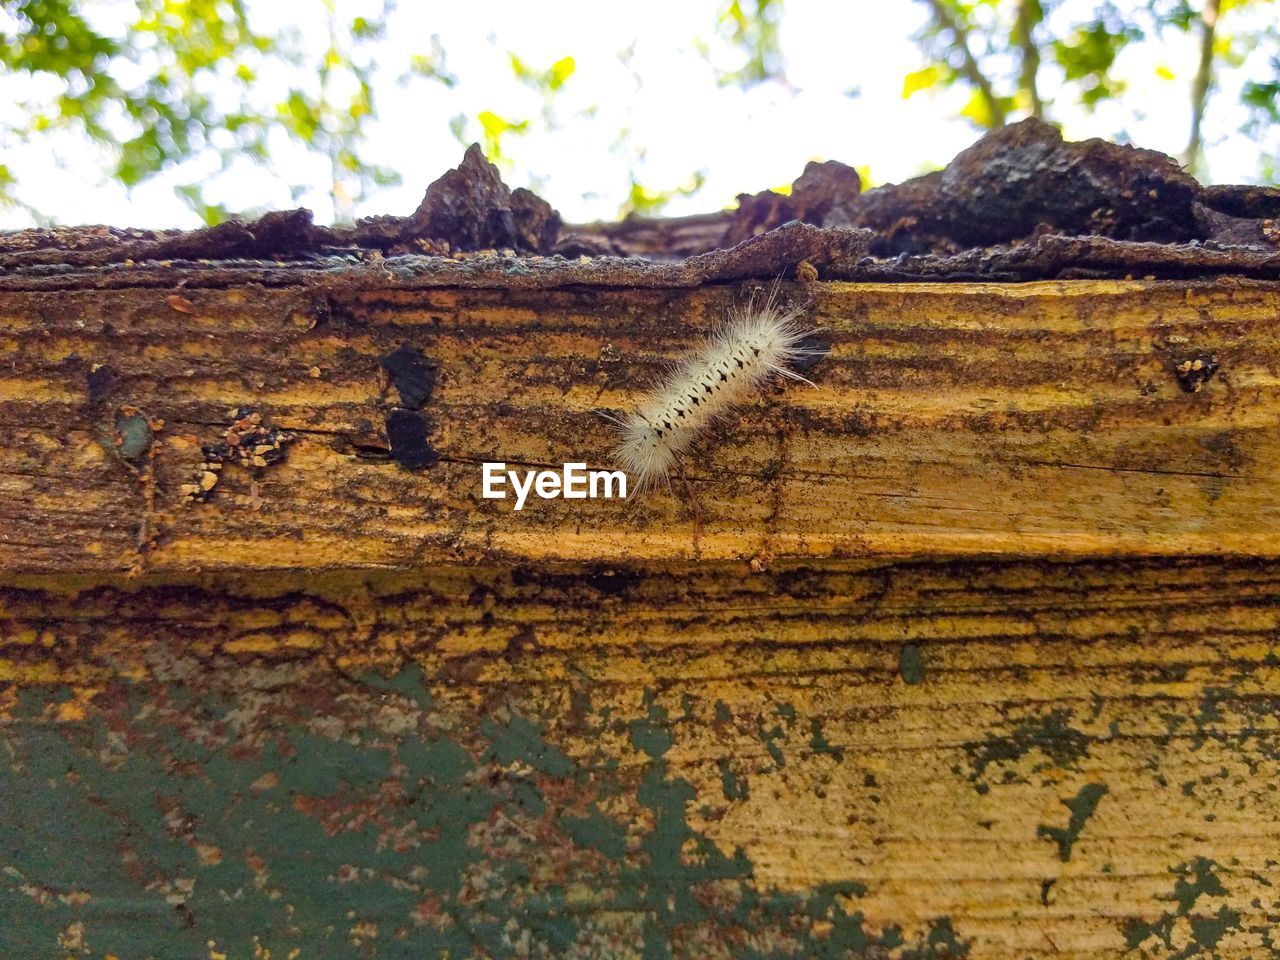 CLOSE-UP OF AN INSECT ON TREE TRUNK